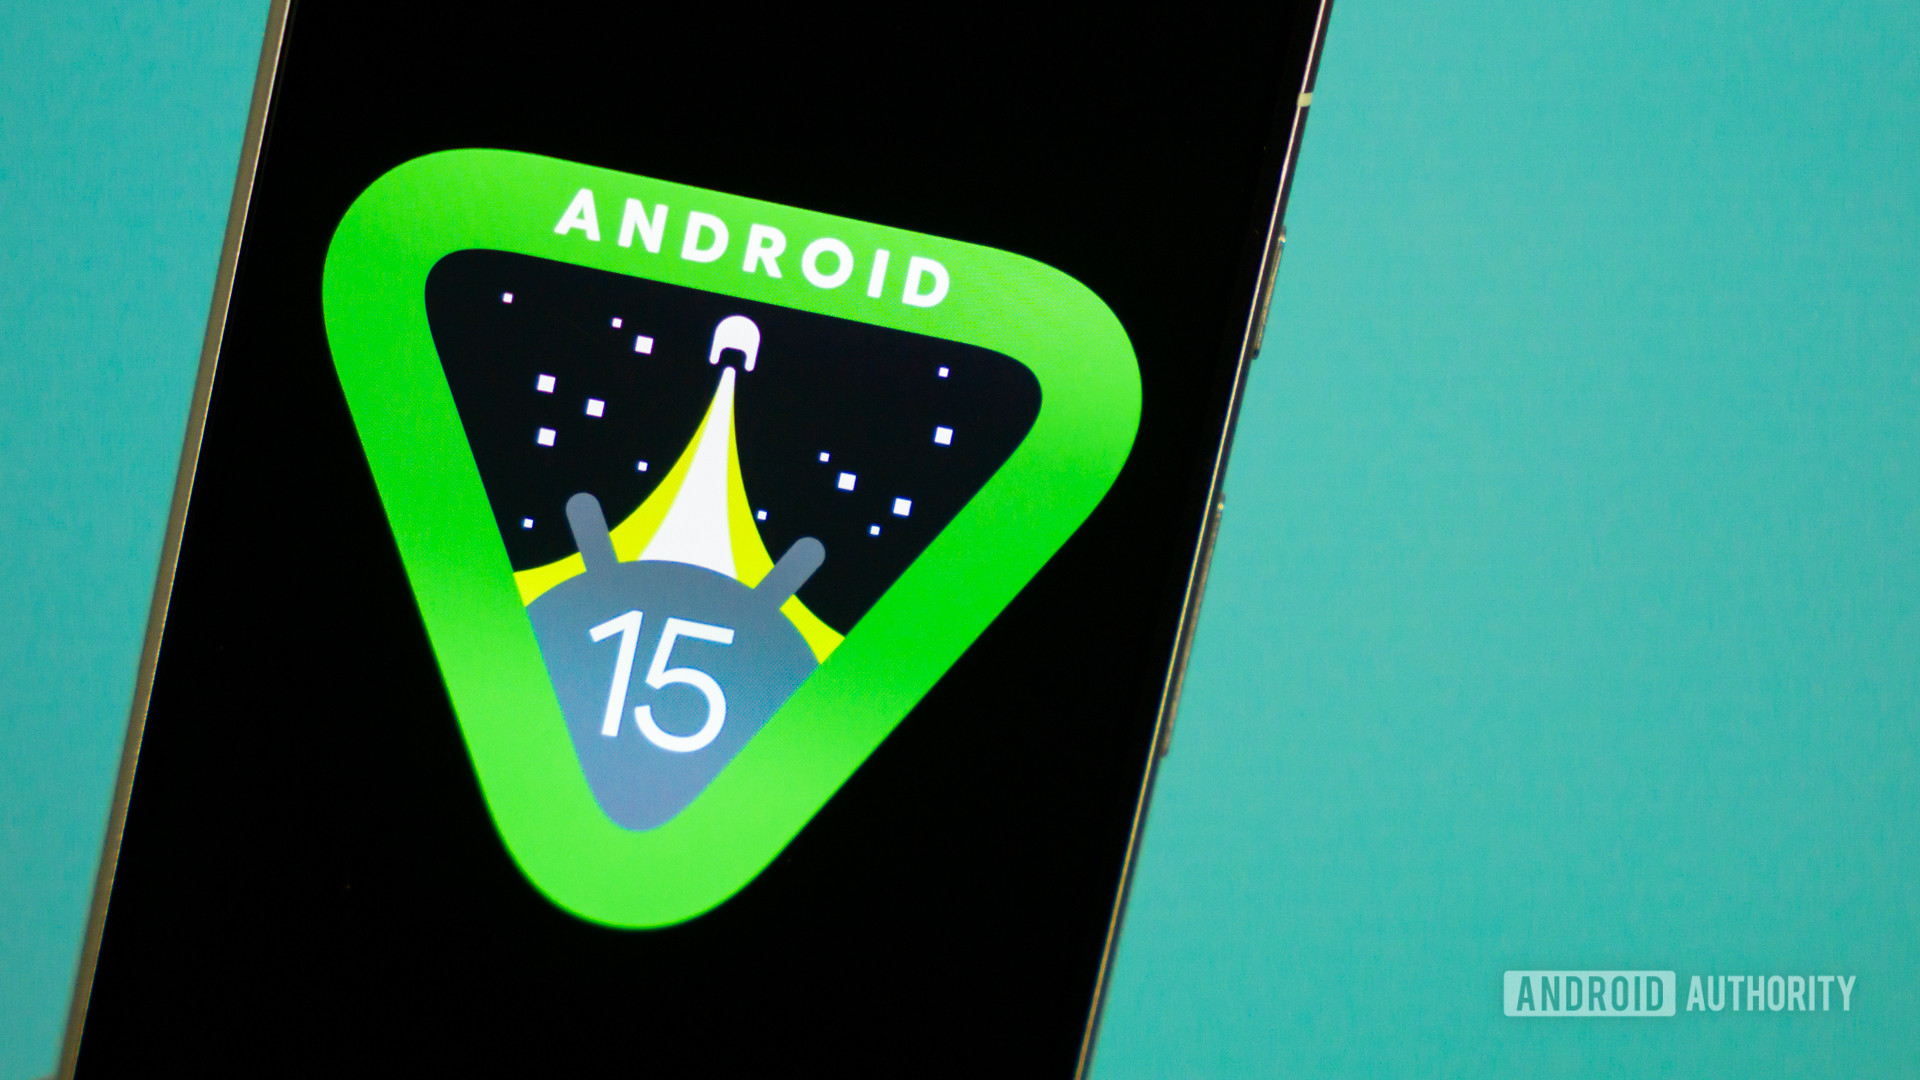 Android 15 logo on smartphone stock photo (7)